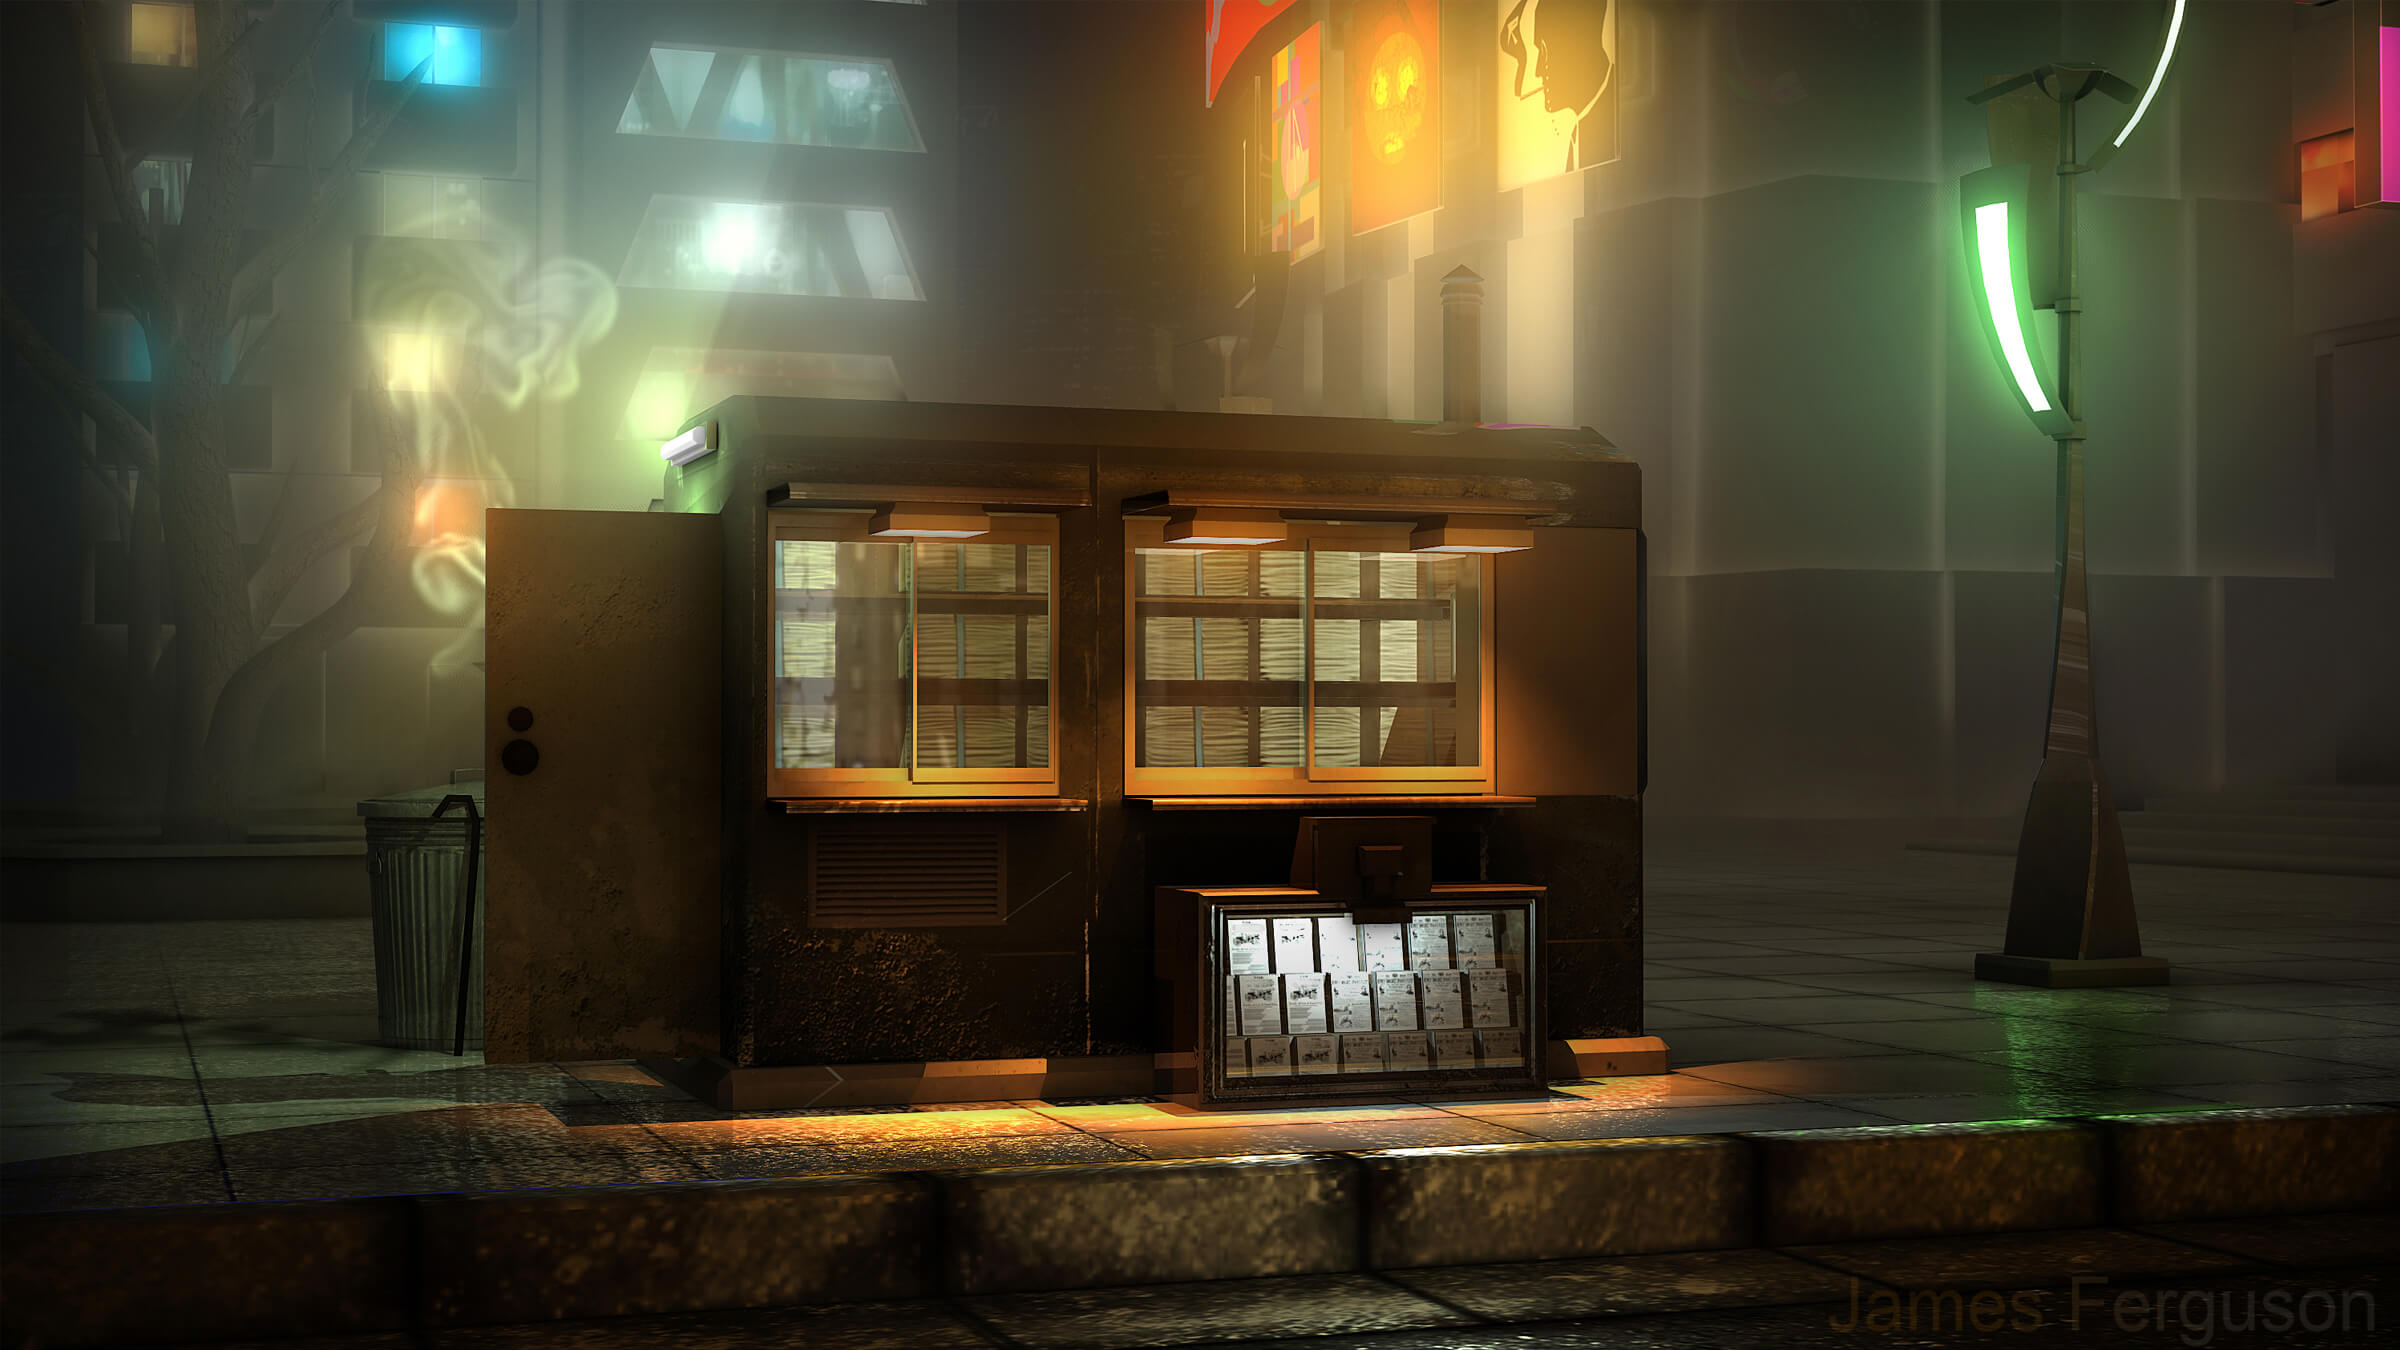 computer-generated 3D environment featuring a small ticket or newsstand-type building on a darkened city sidewalk